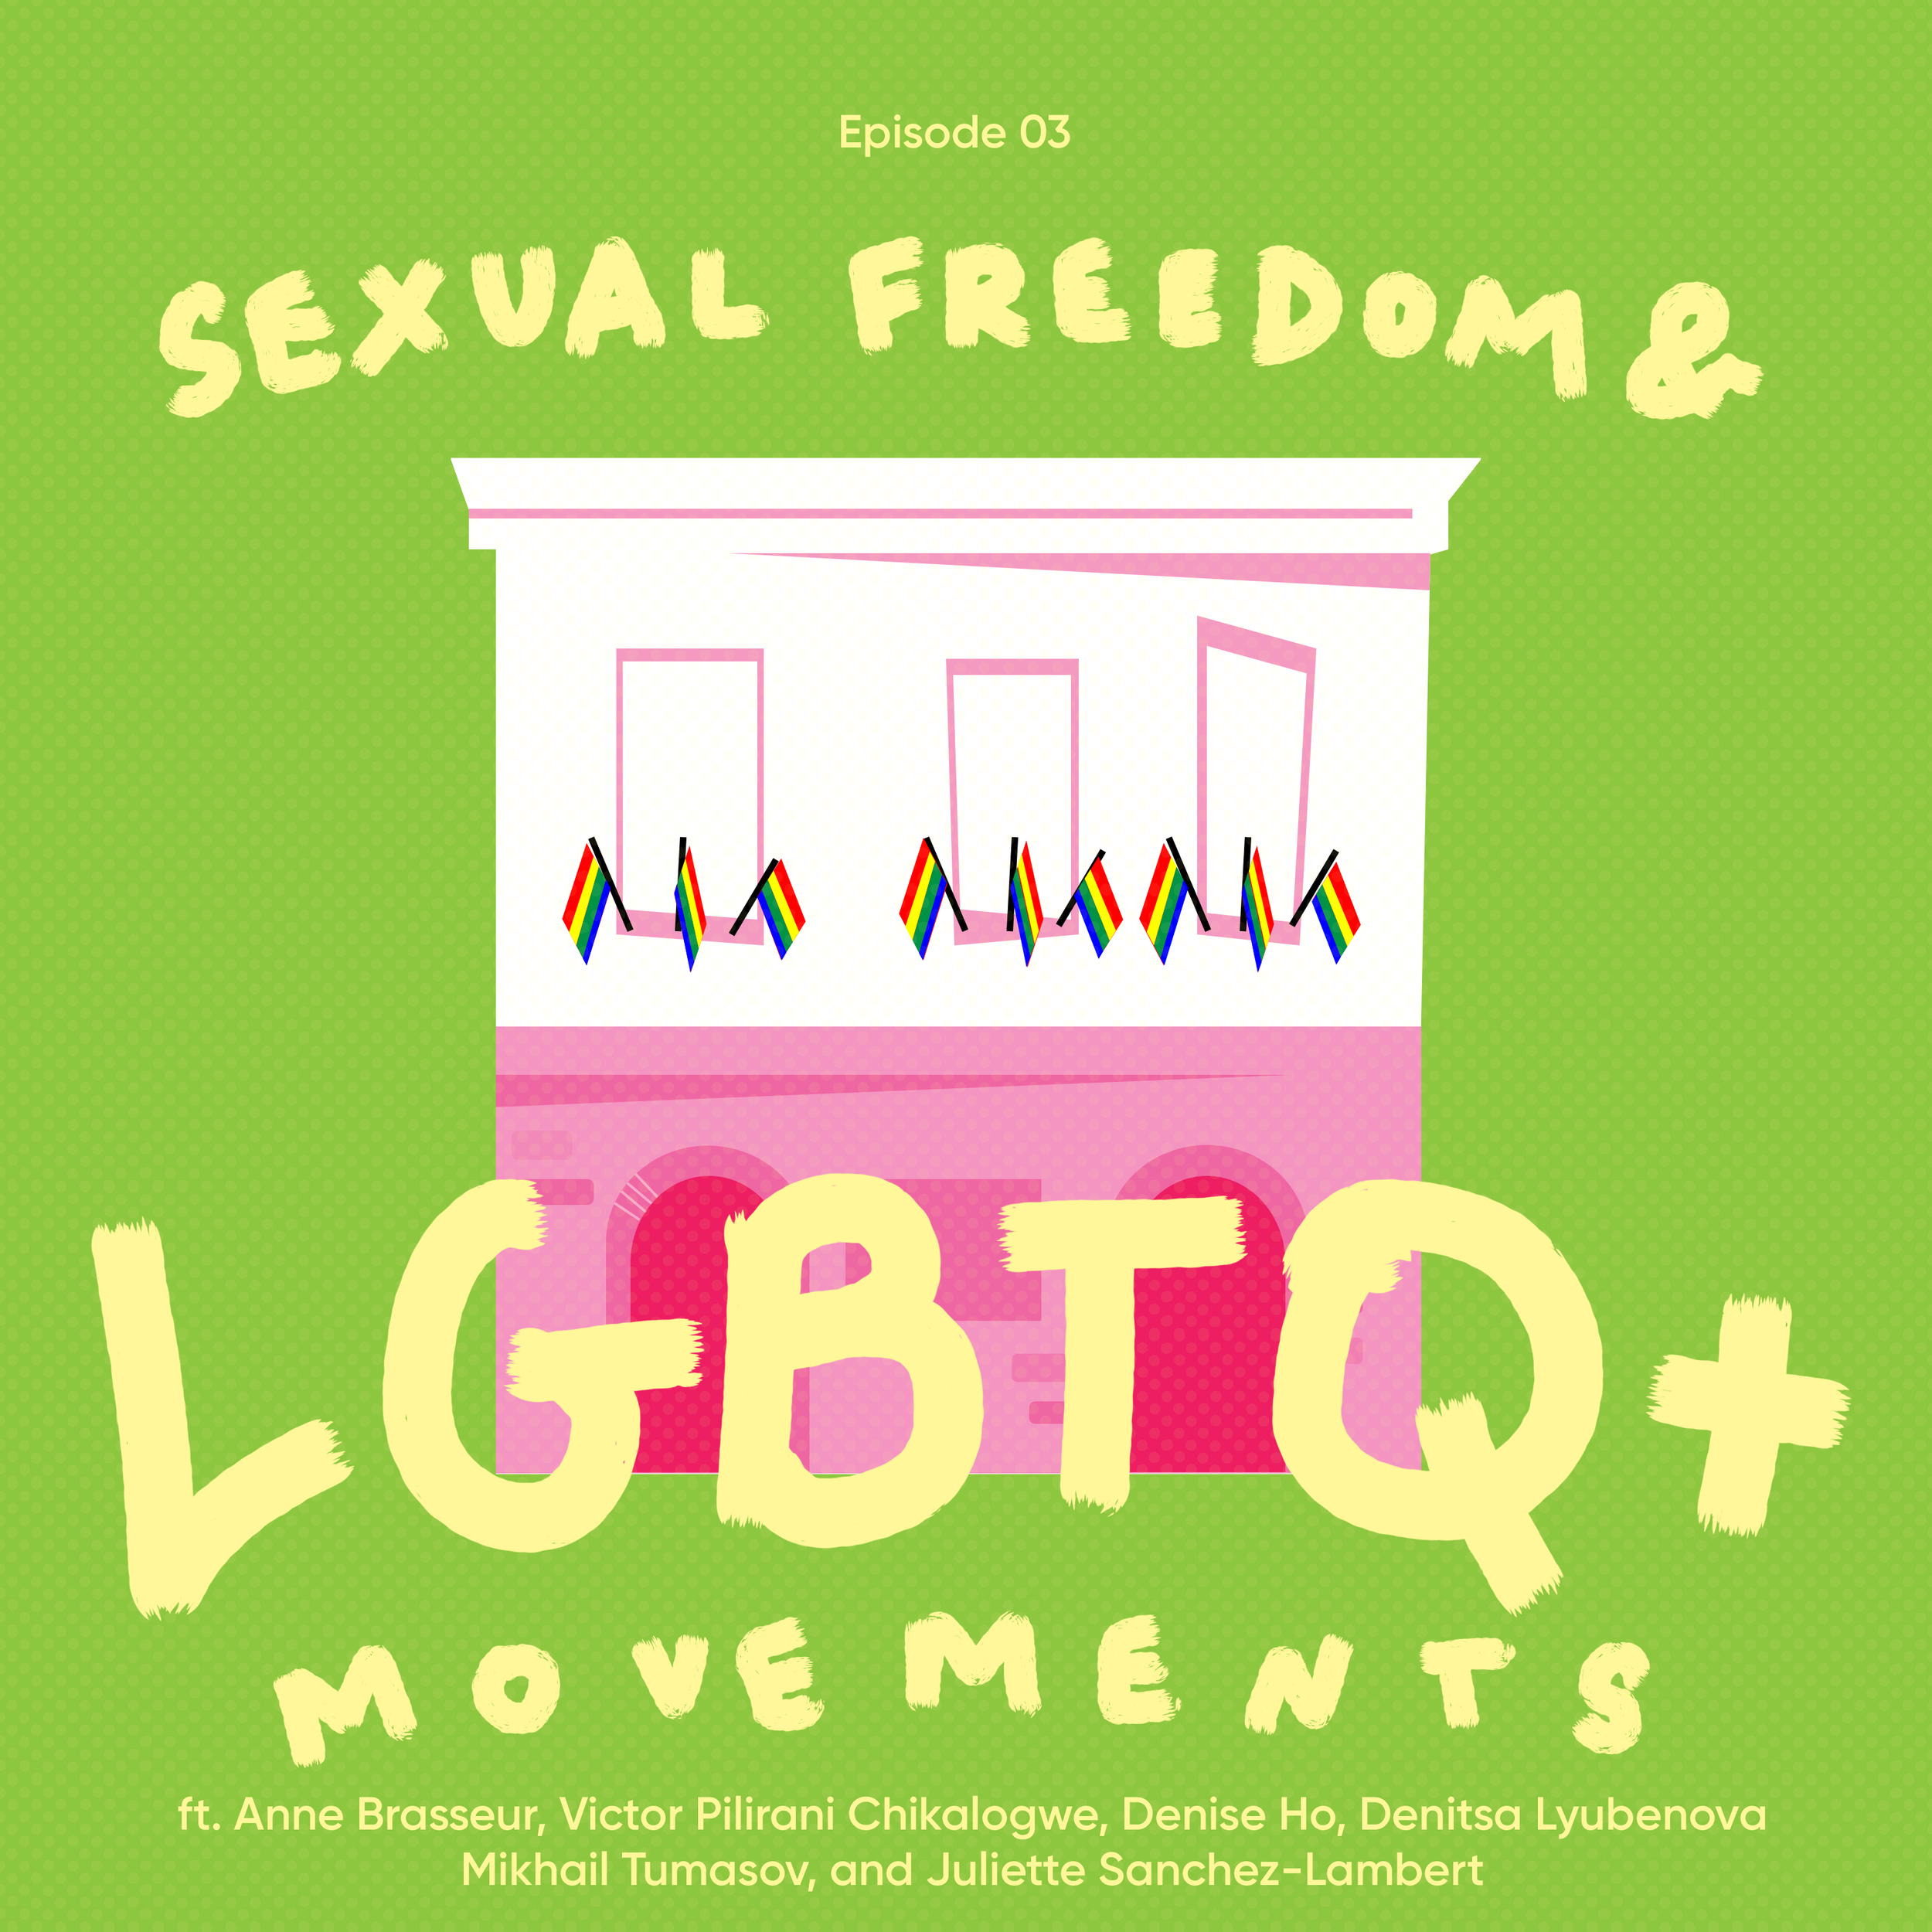 sexual freedomlgbtmove insta.png